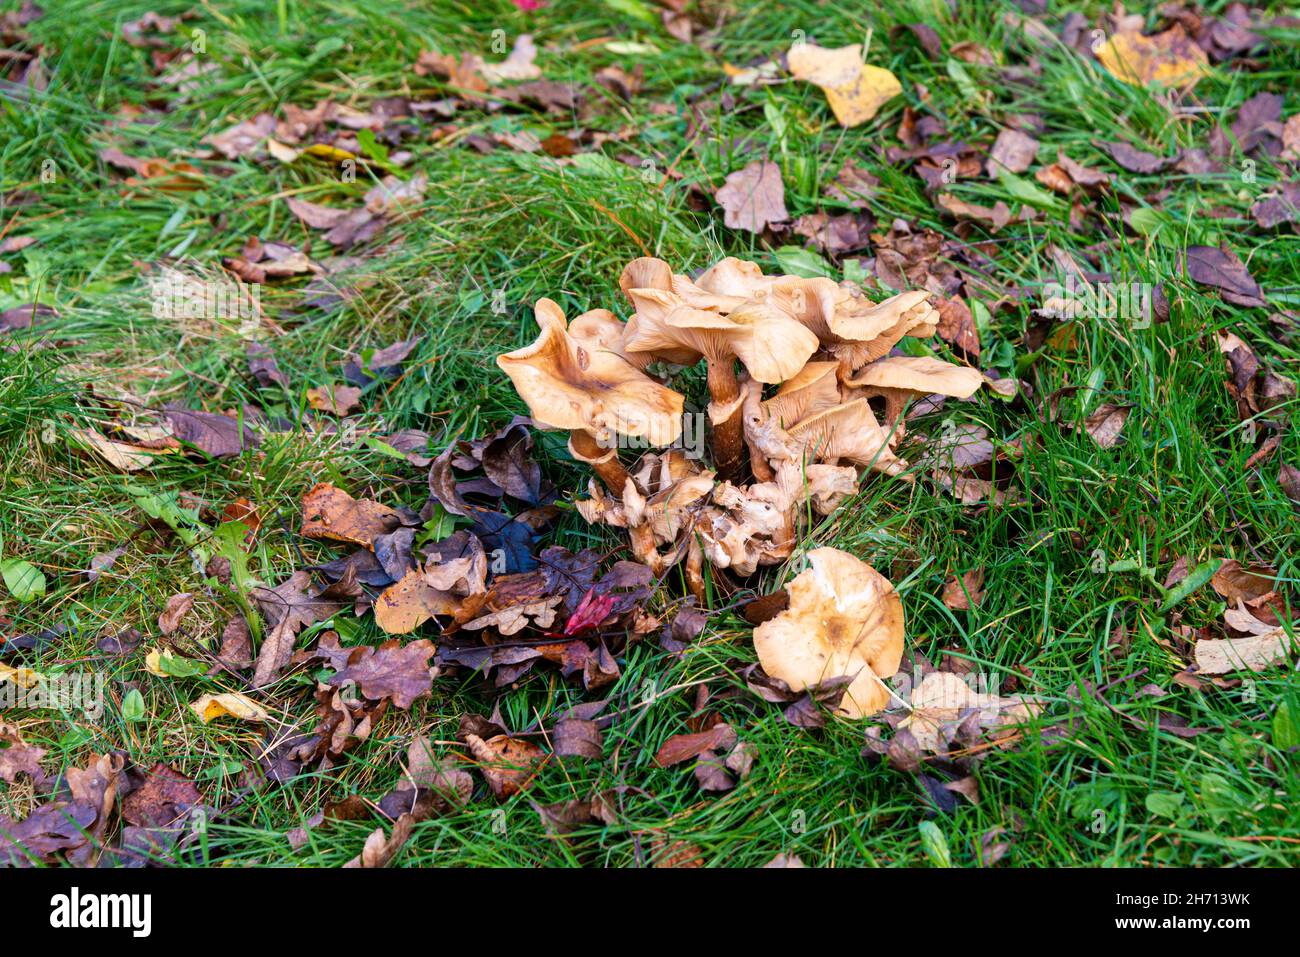 Brown fungi growing in grass in the autumn Stock Photo